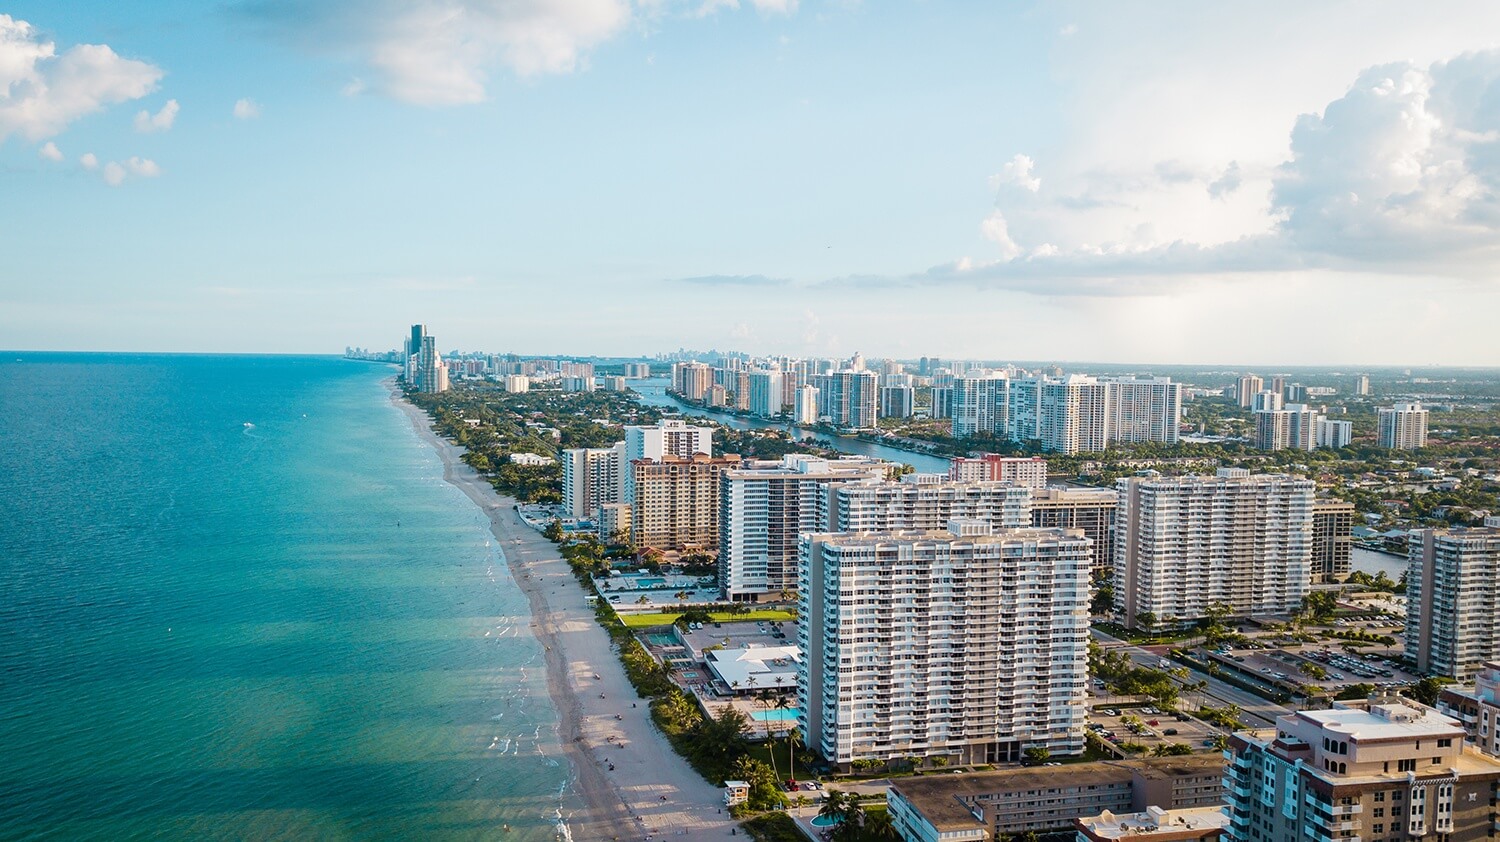 Florida: the best state for investors to own vacation rentals